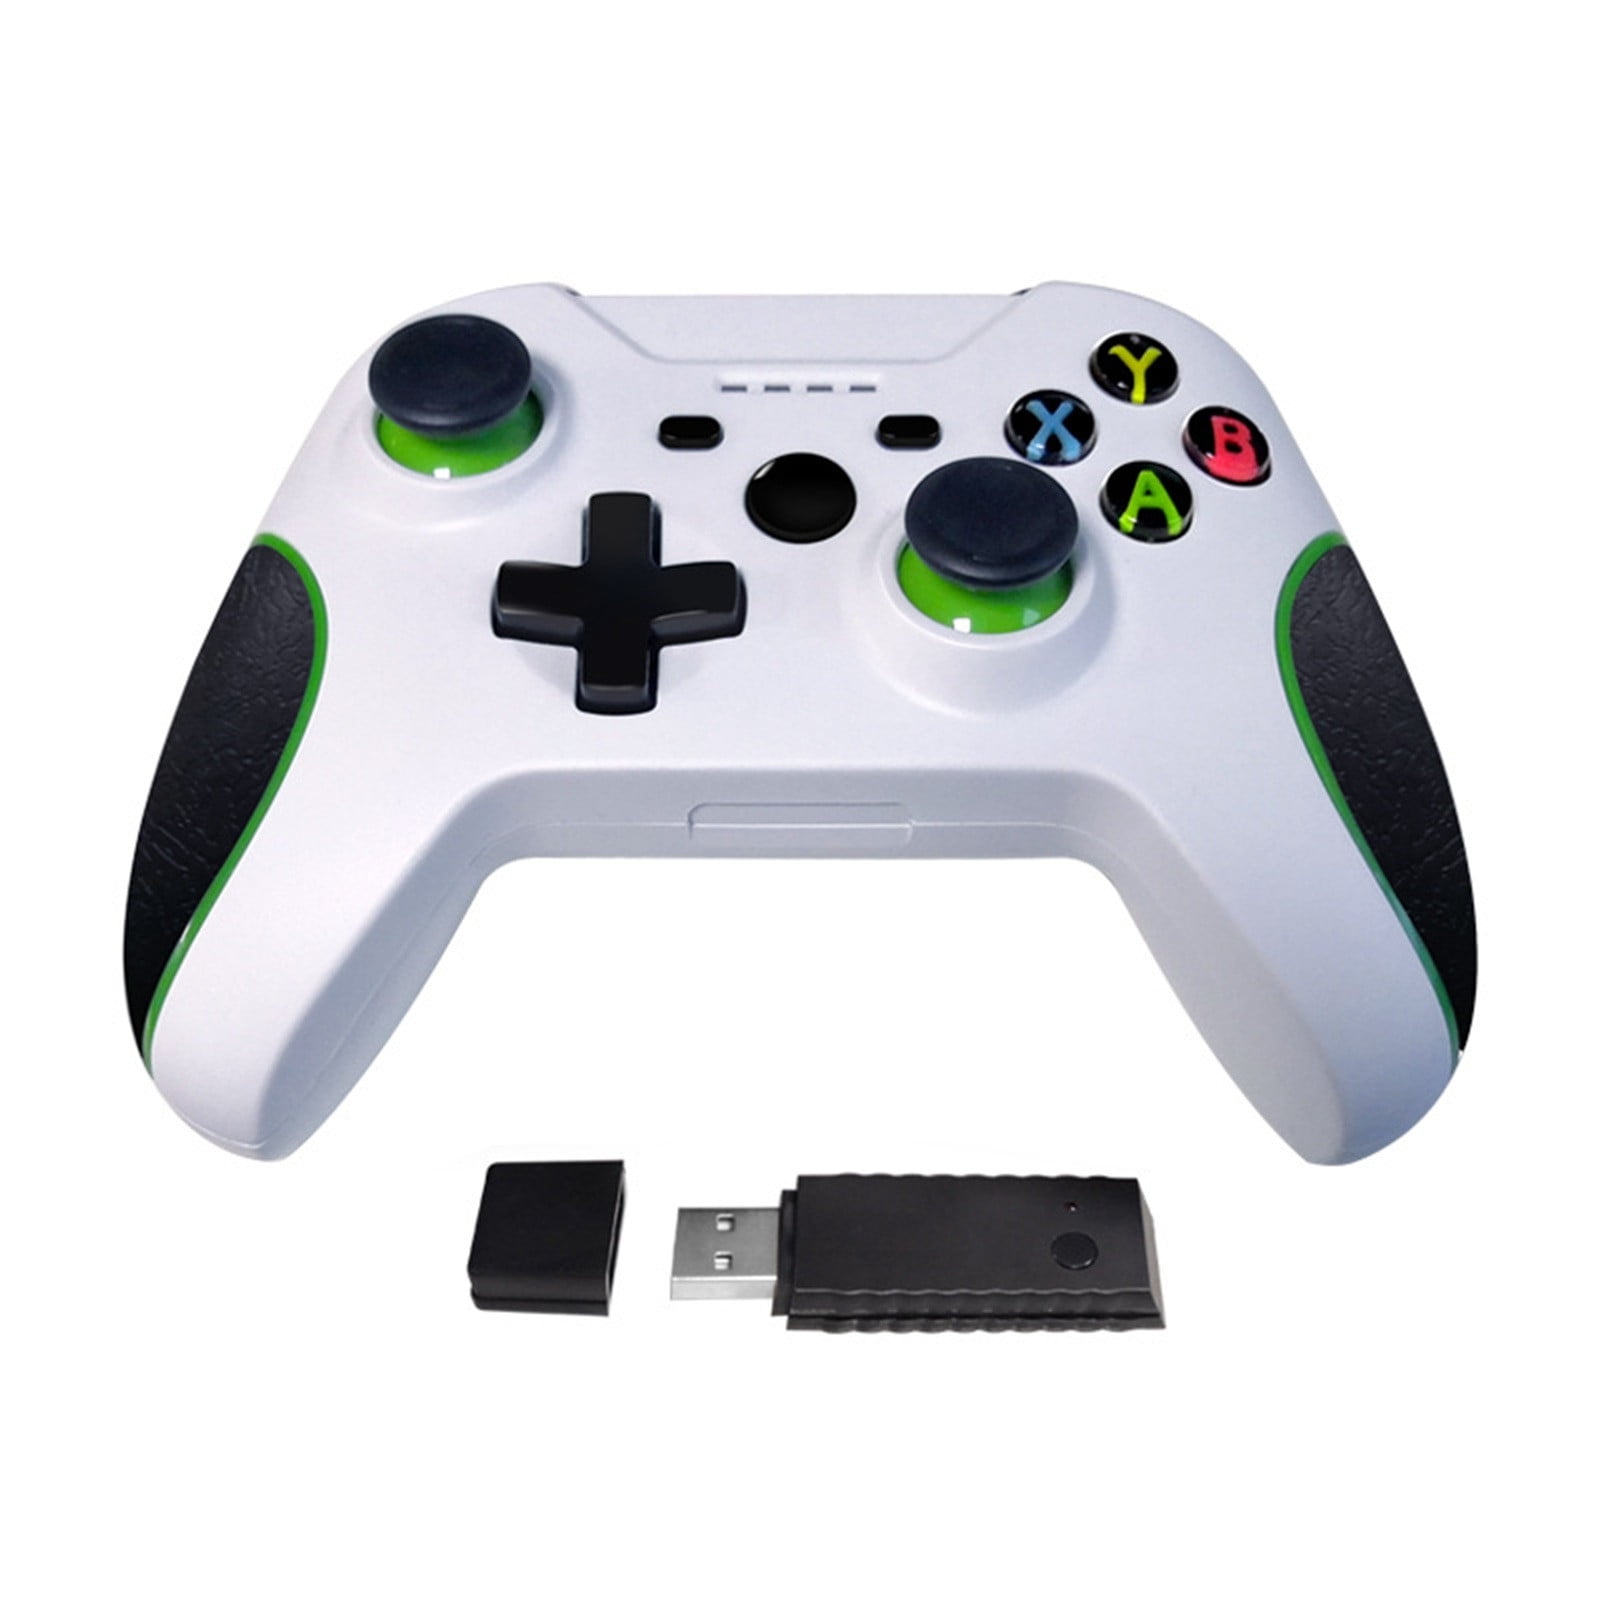 Er is behoefte aan Uitsteken bibliotheek Improved Gamepad for Wireless Controller for X-box One/One S/One X/for PS3/One  Elite/Windows 10 - Double Vibration - Walmart.com